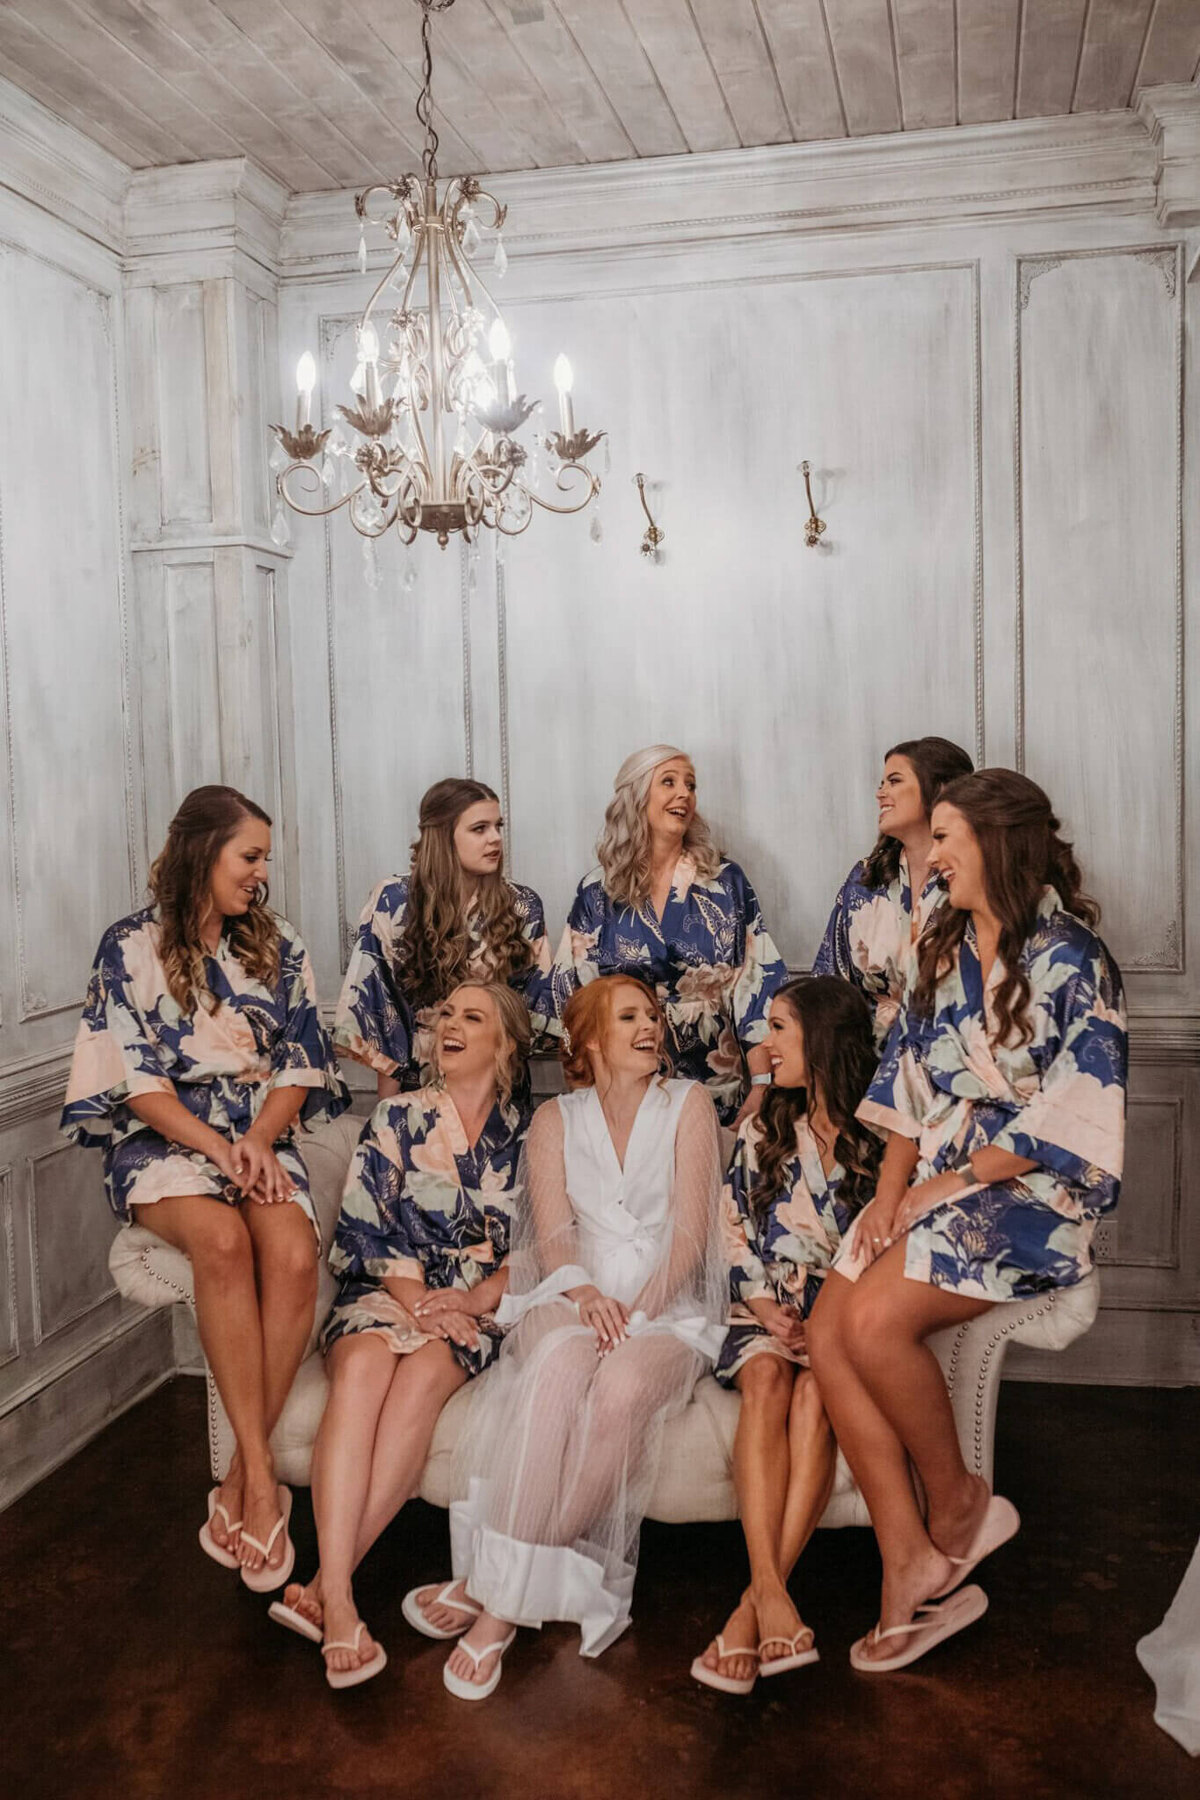 Photo of women and white and navy robes sitting on a couch laughing together with a chandelier overhead